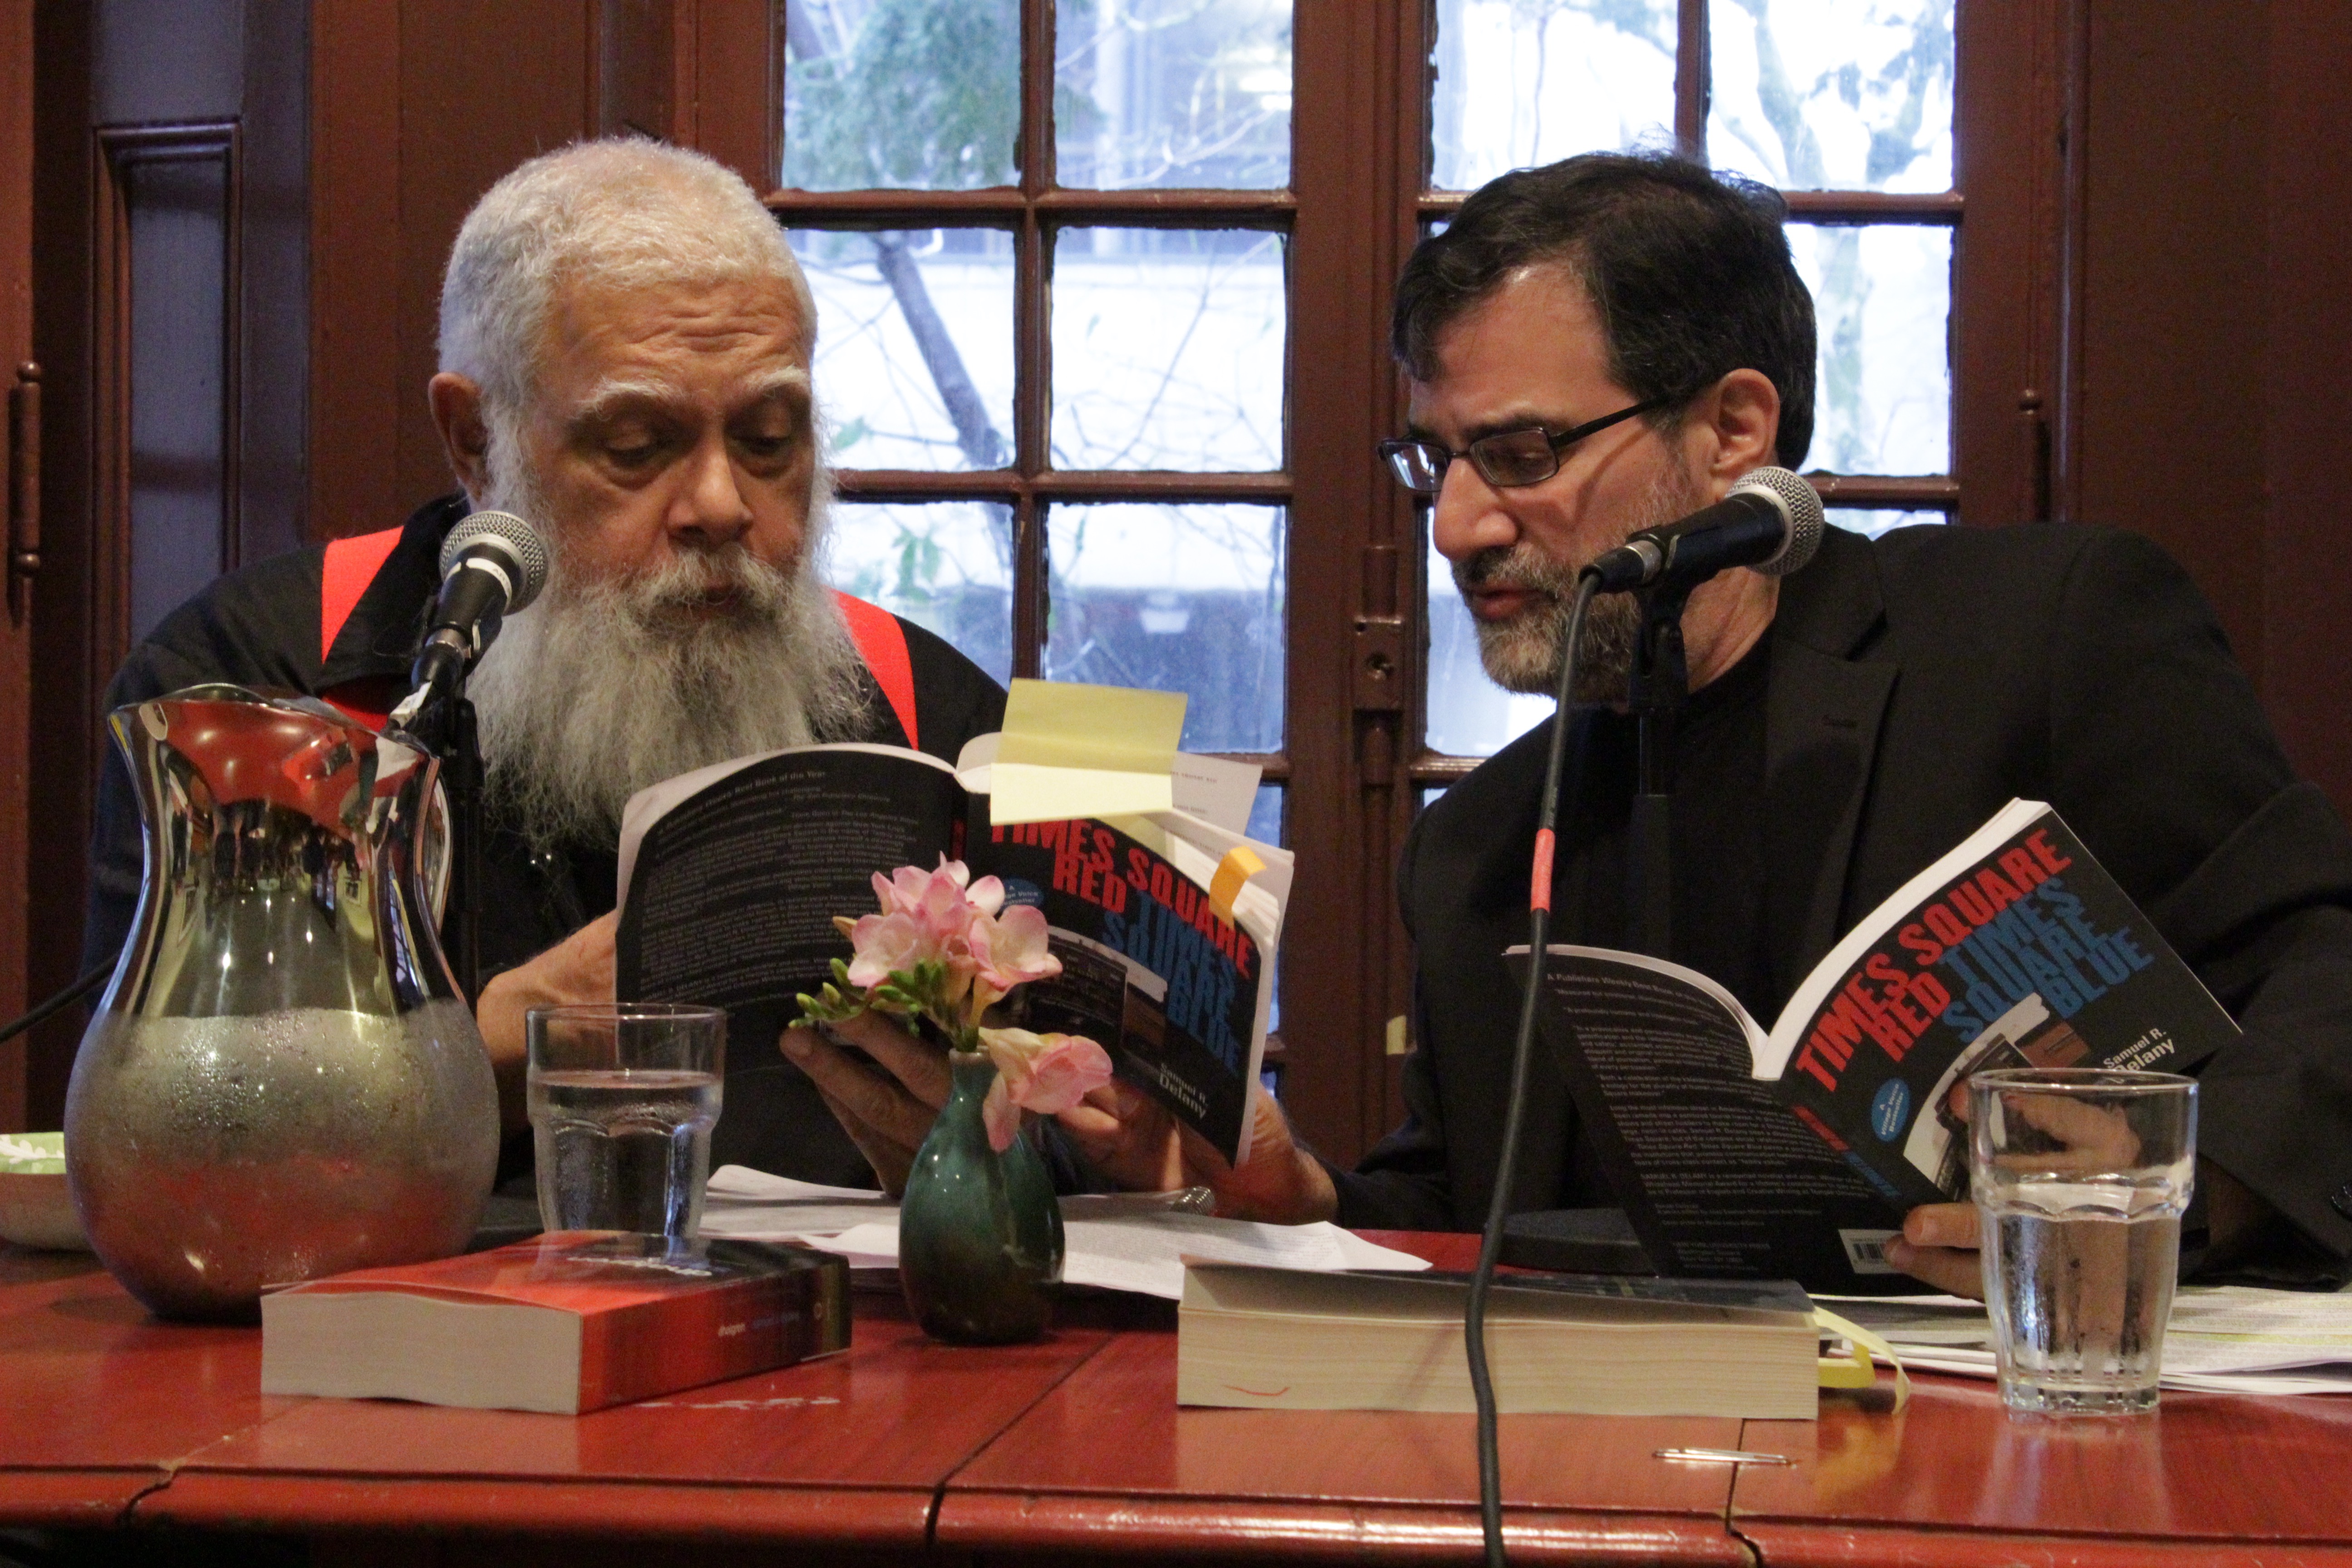 Samuel Delany and Al Filreis sit at a table looking at two copies of the same book.